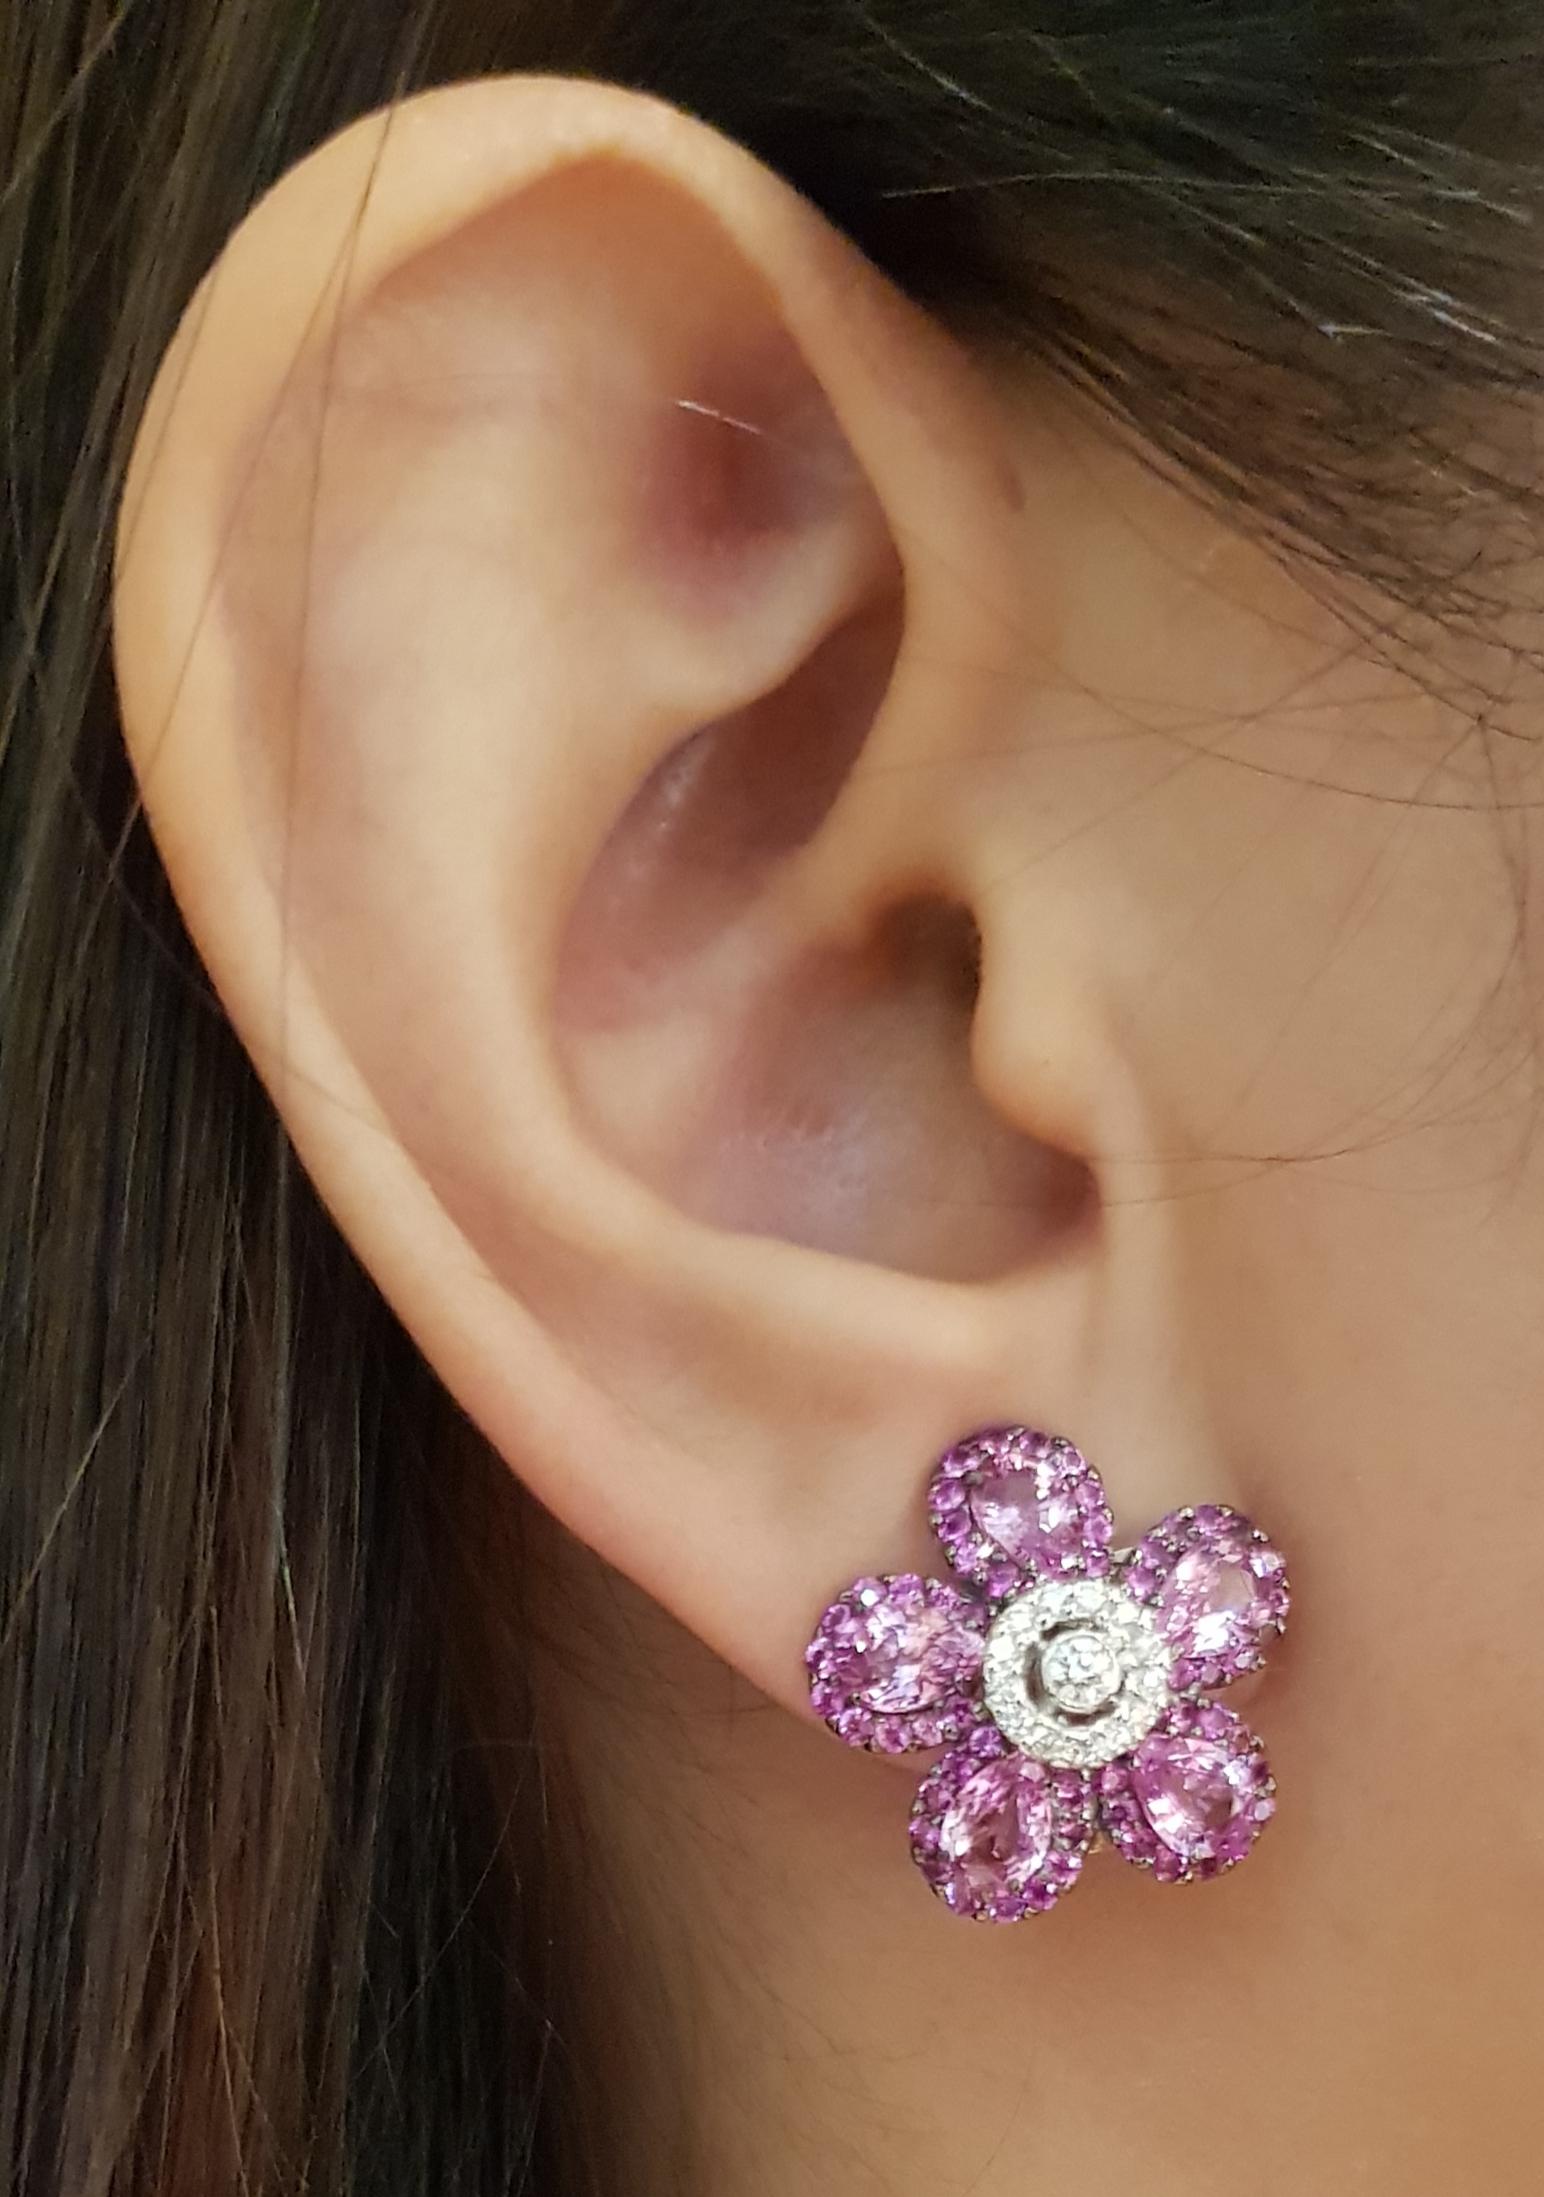 Pink Sapphire 6.50 carats with Diamond 0.35 carat Earrings set in 18 Karat White Gold Settings

Width: 1.9 cm 
Length: 1.9 cm
Total Weight: 10.16 grams

